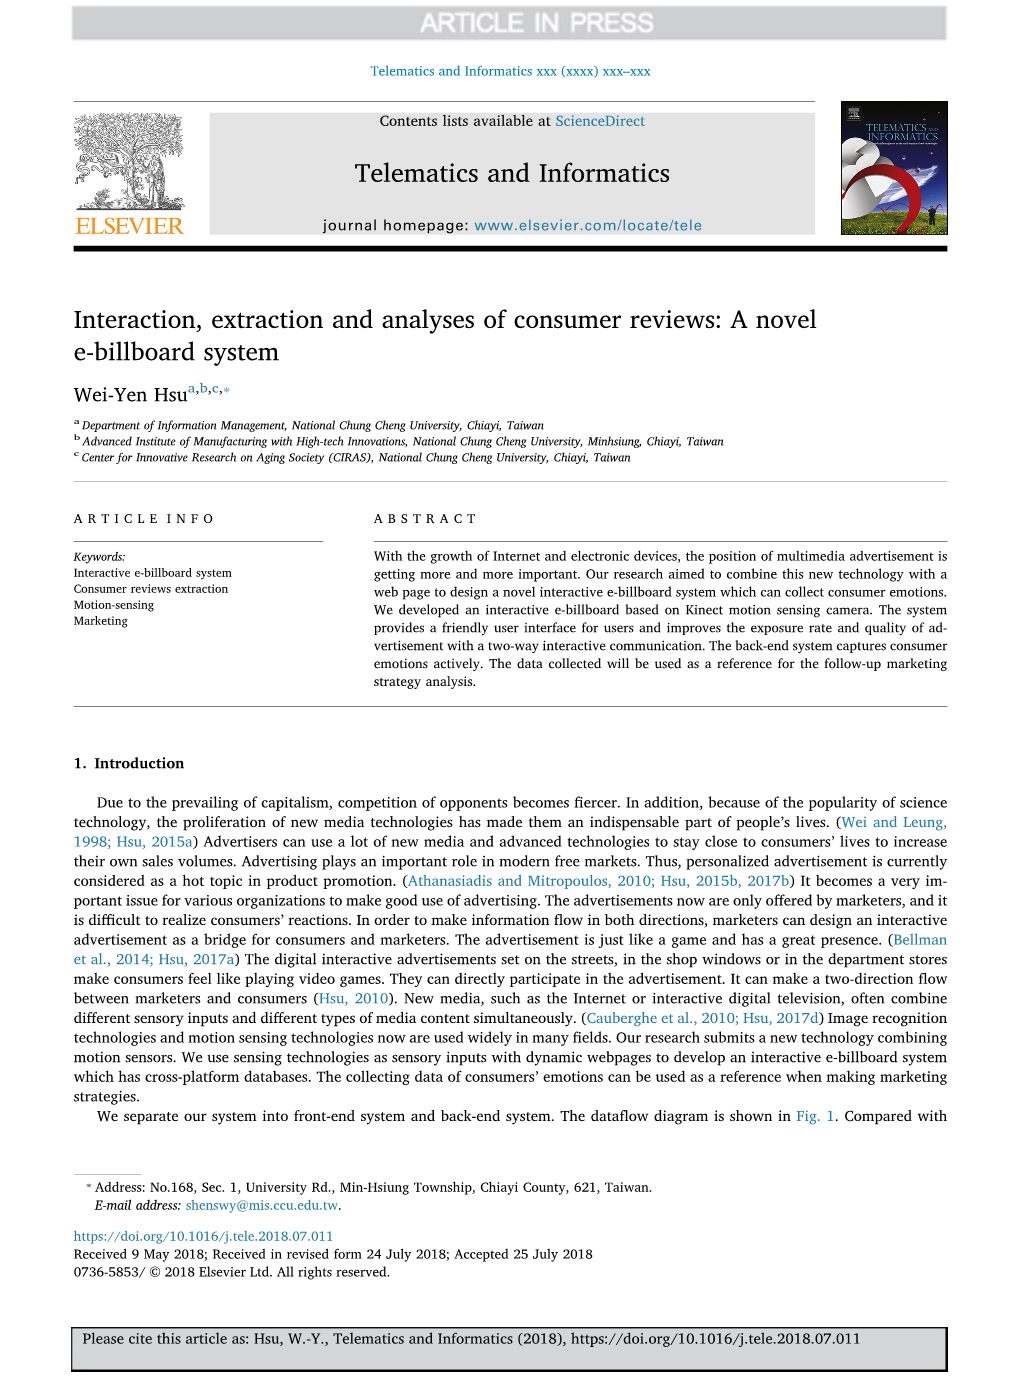 Interaction, Extraction and Analyses of Consumer Reviews a Novel E